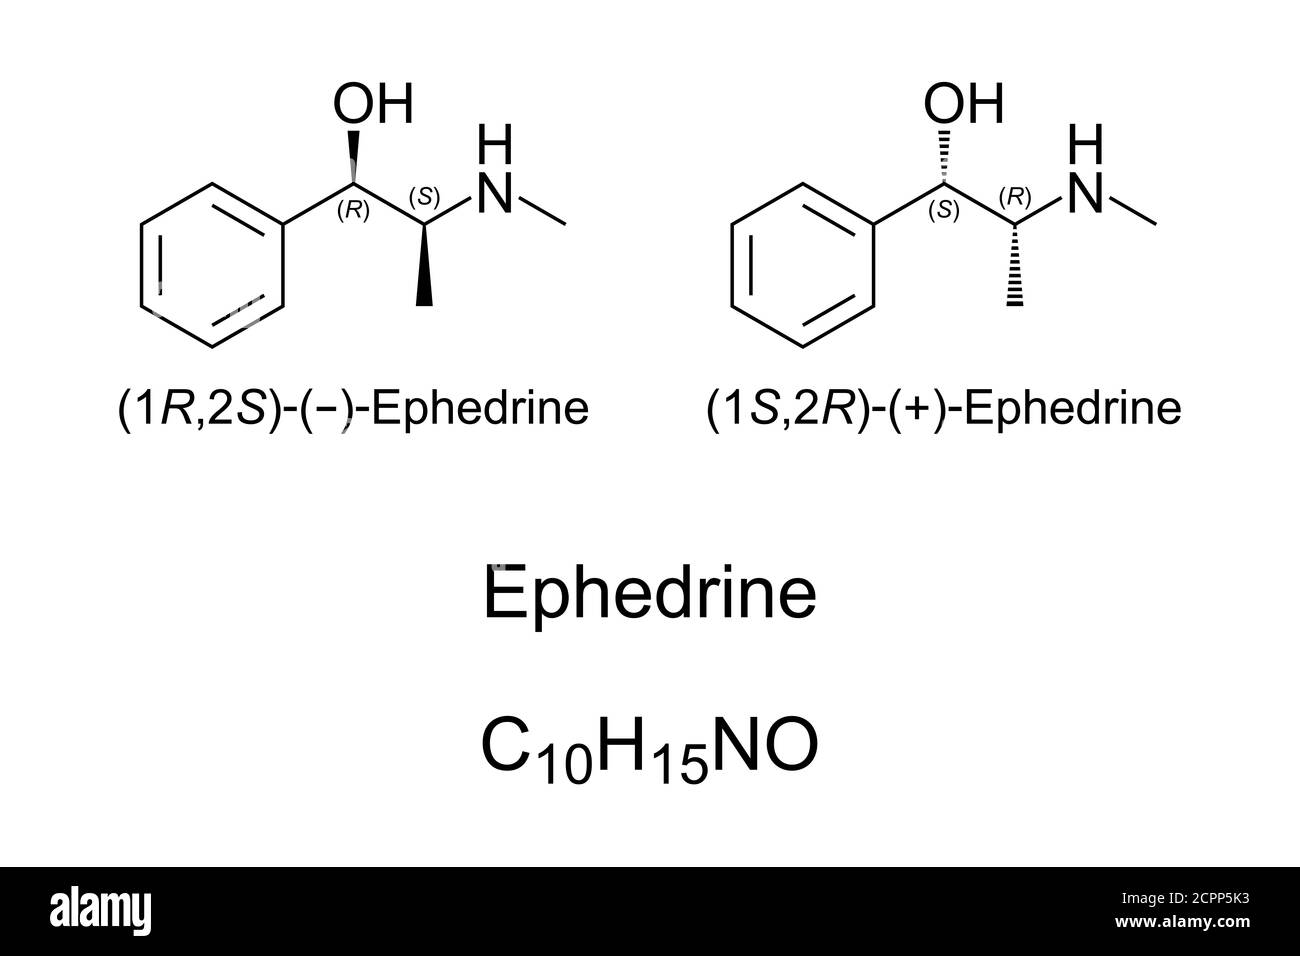 Ephedrine, chemical structure. Medication and stimulant to prevent low blood pressure and to treat obesity and asthma. Used illegally as doping agent. Stock Photo